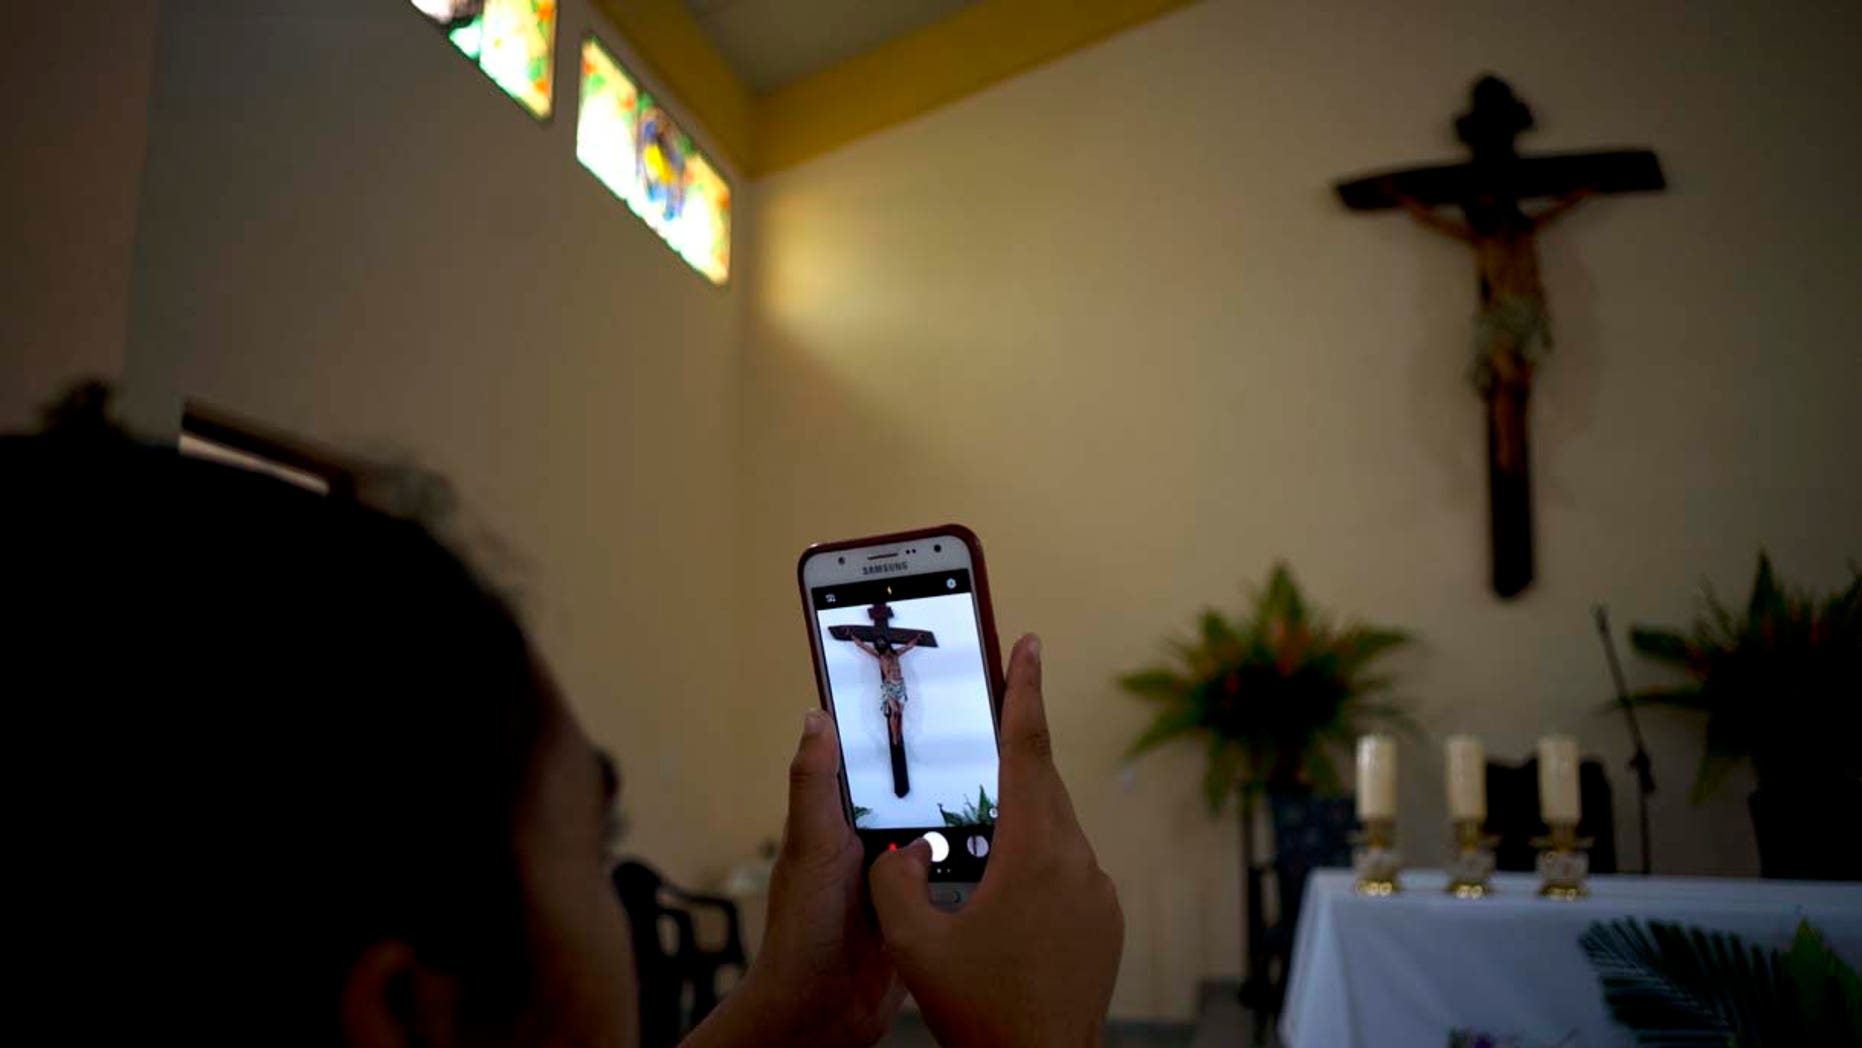 Cuba opens first church since start of communist rule with aid from Florida congregation